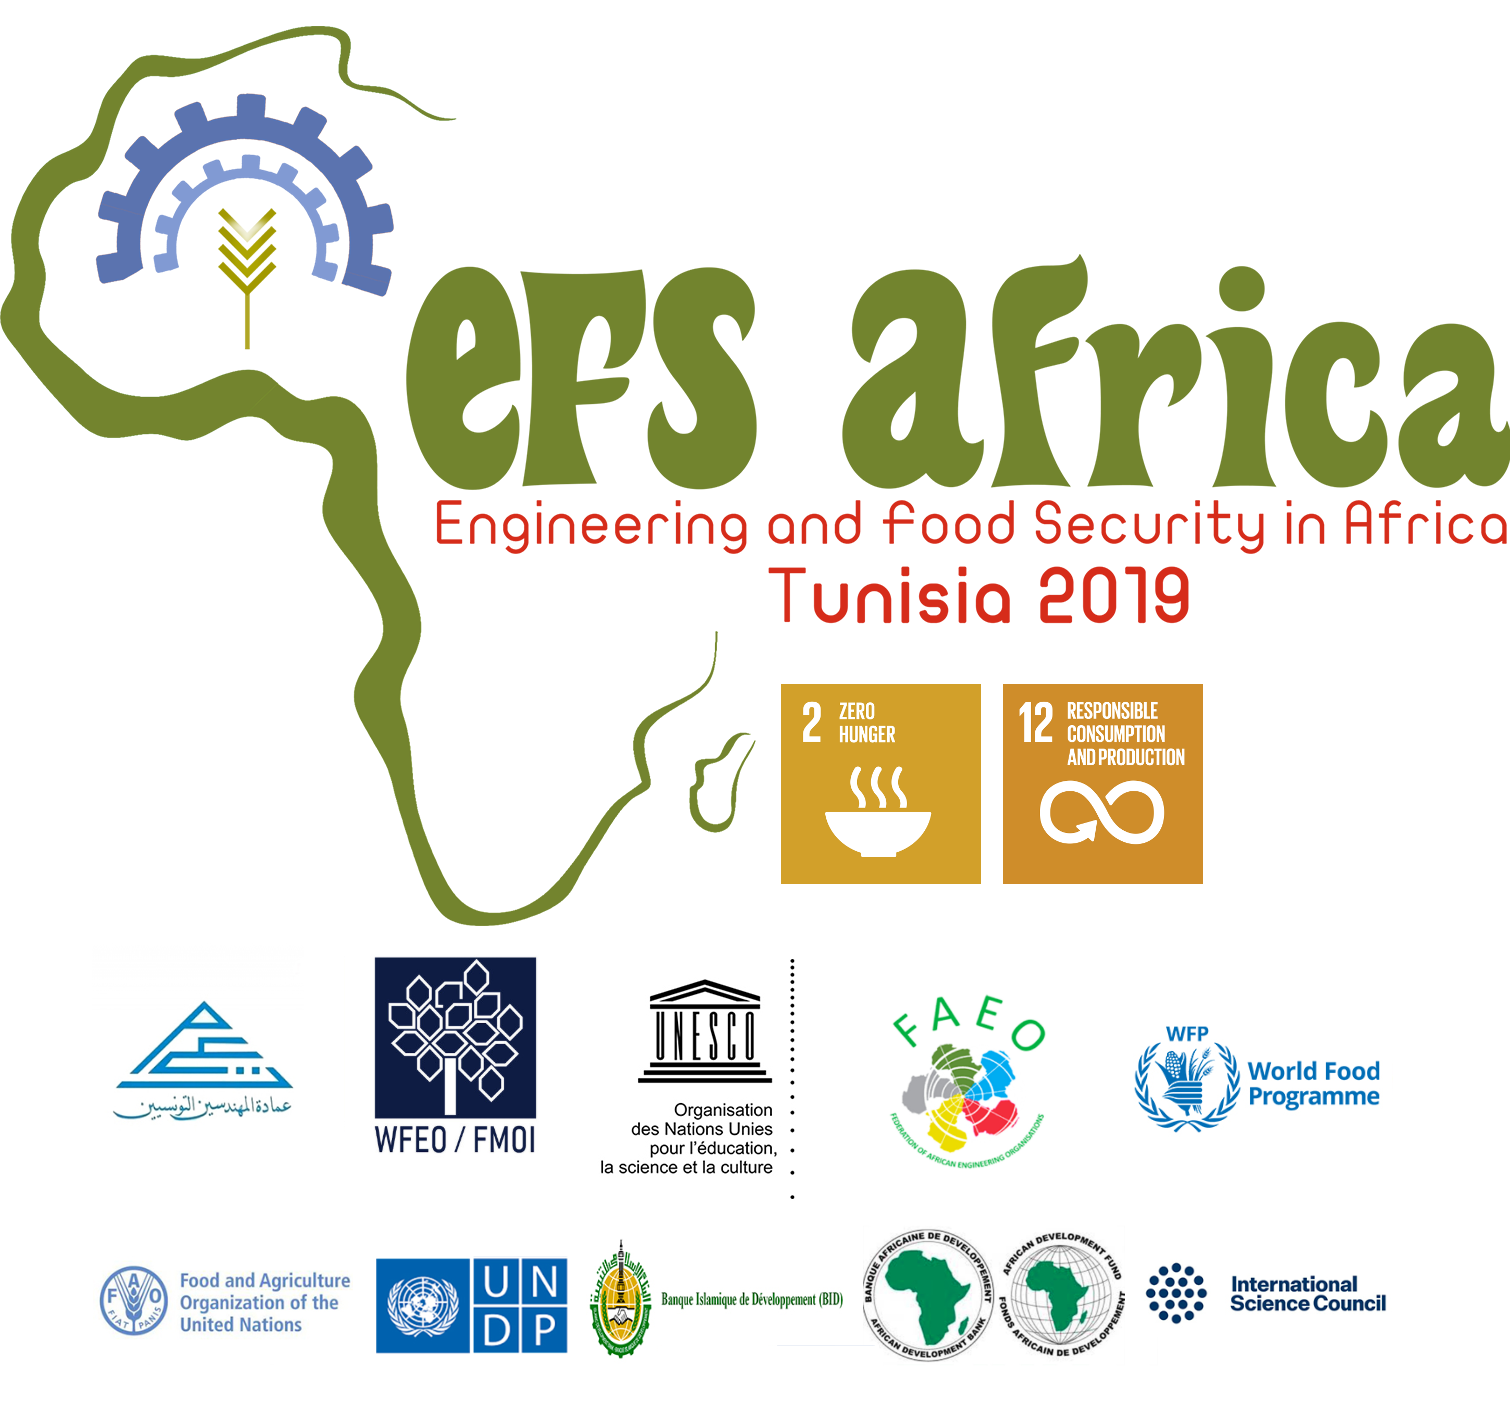 WFEO report on the International Conference on Engineering and Food Security in Africa